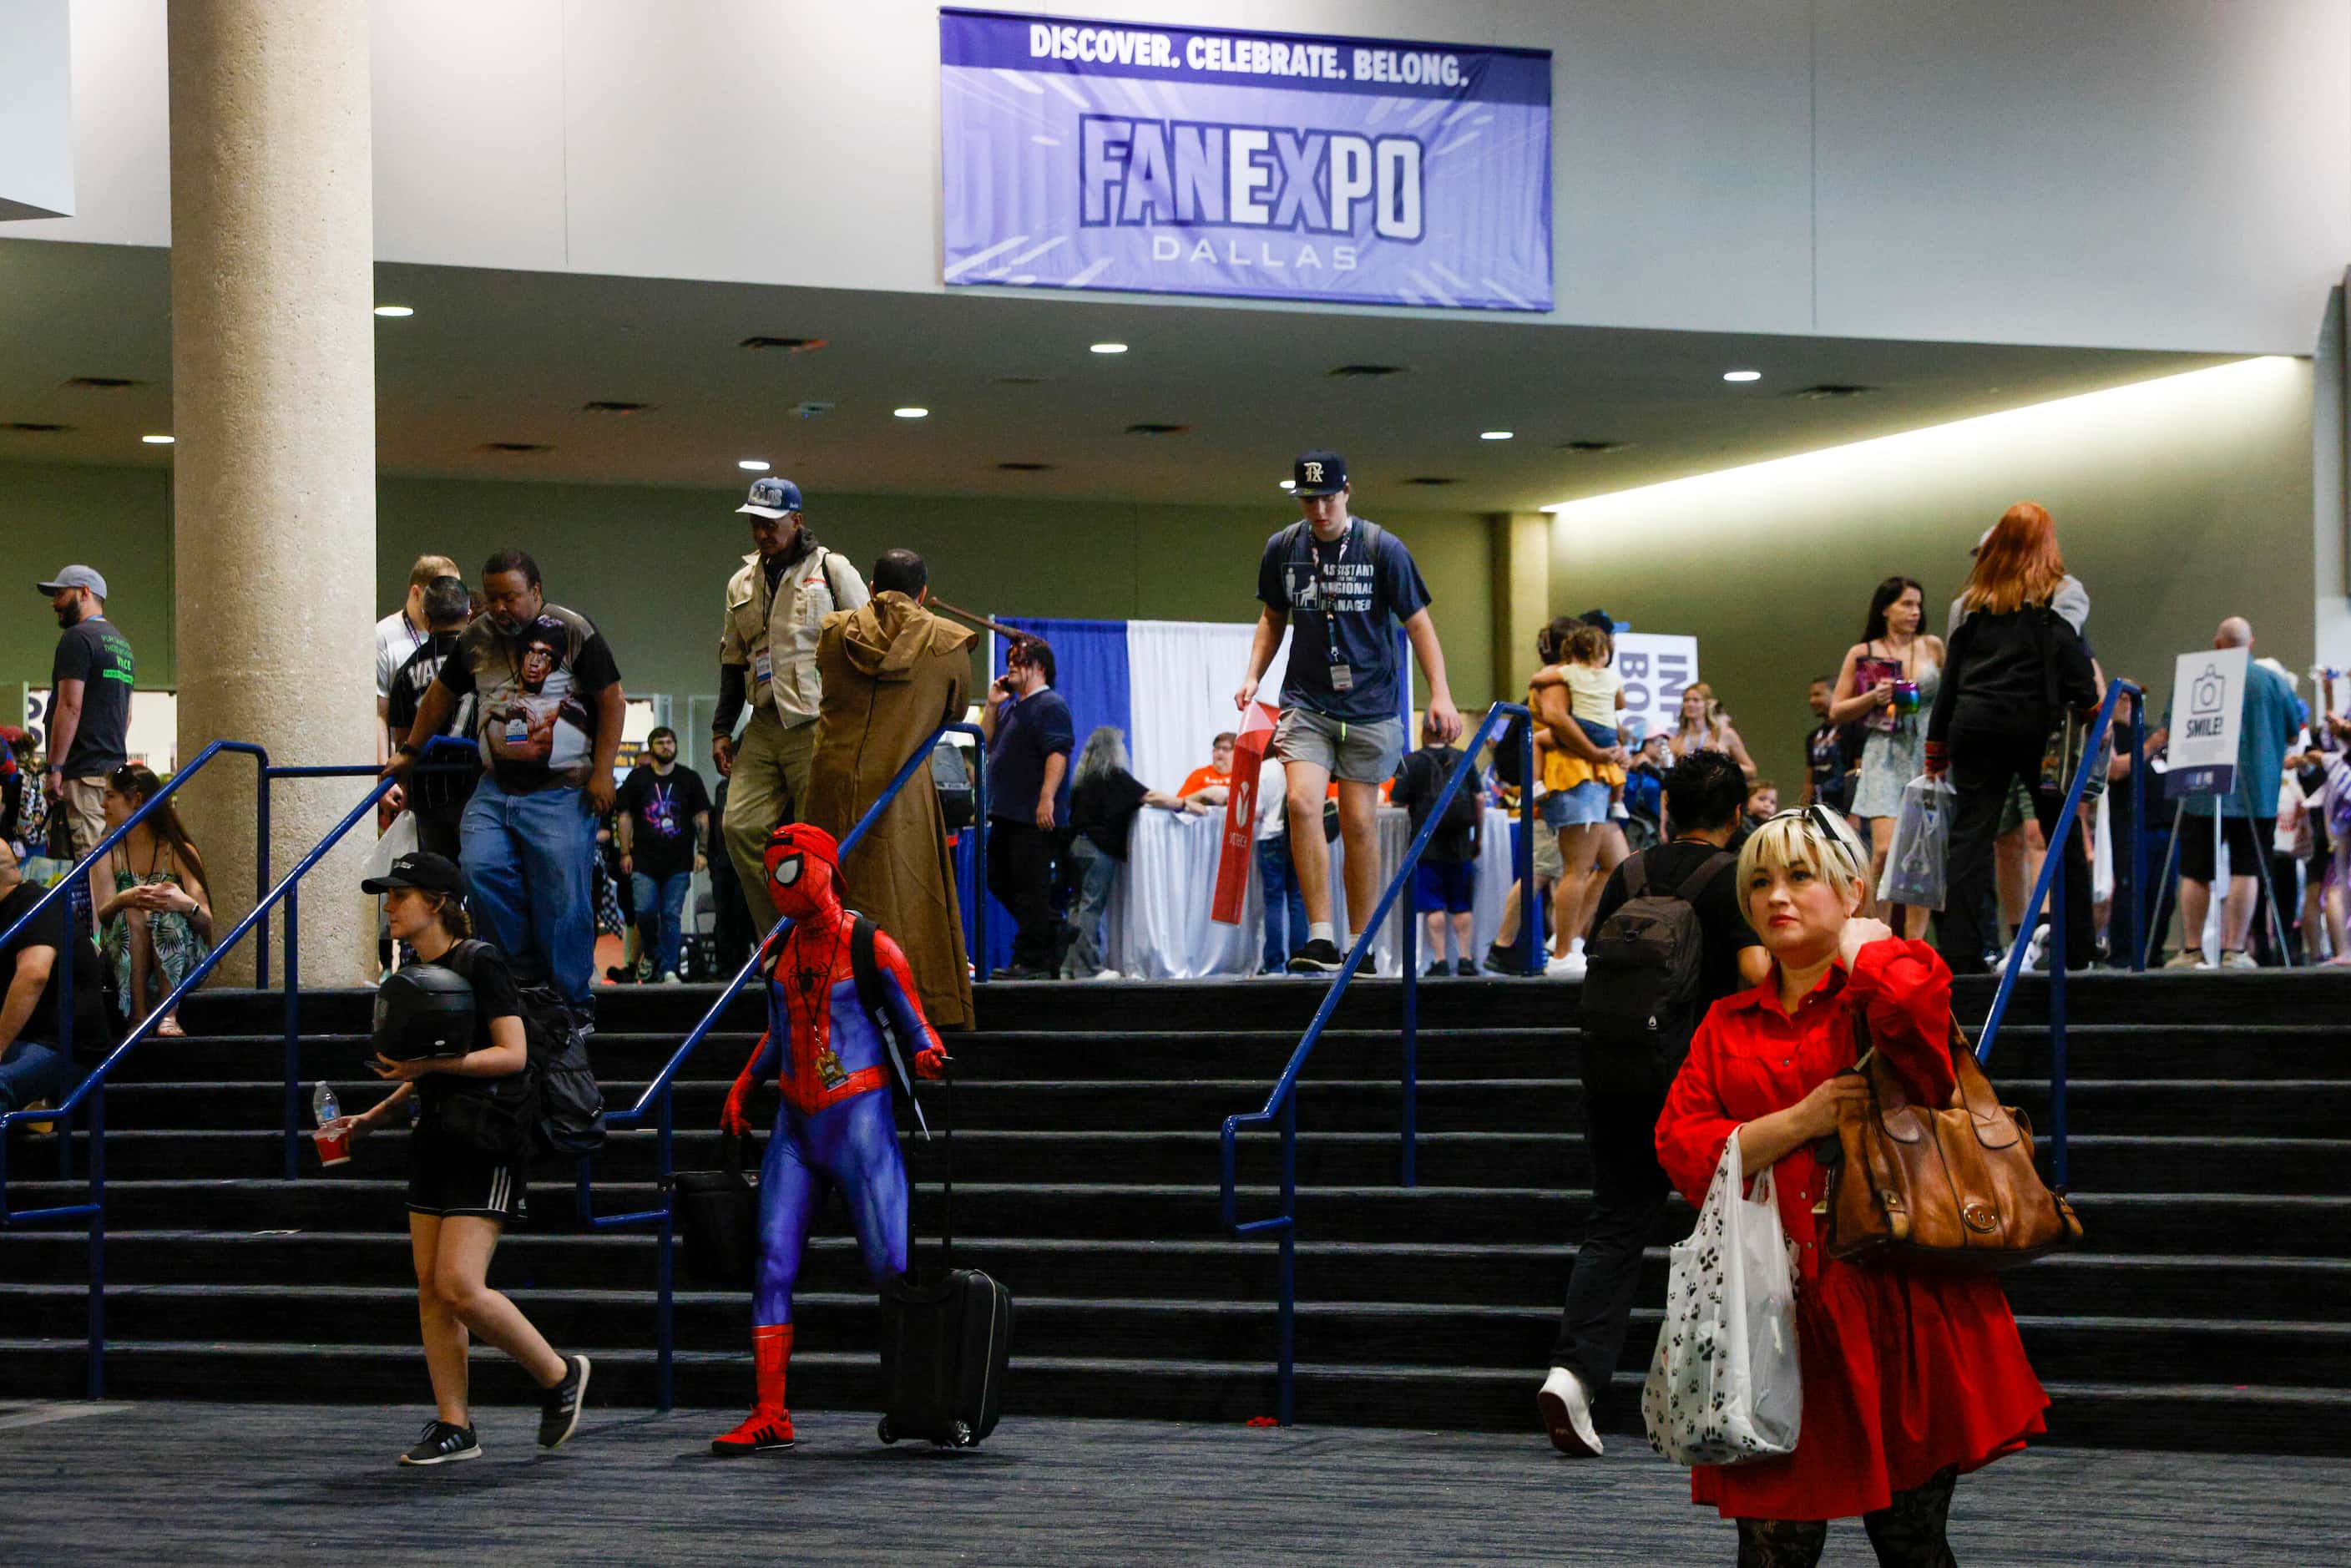 Attendees head for the doors at the end of the Fan Expo Dallas at the Kay Bailey Hutchison...